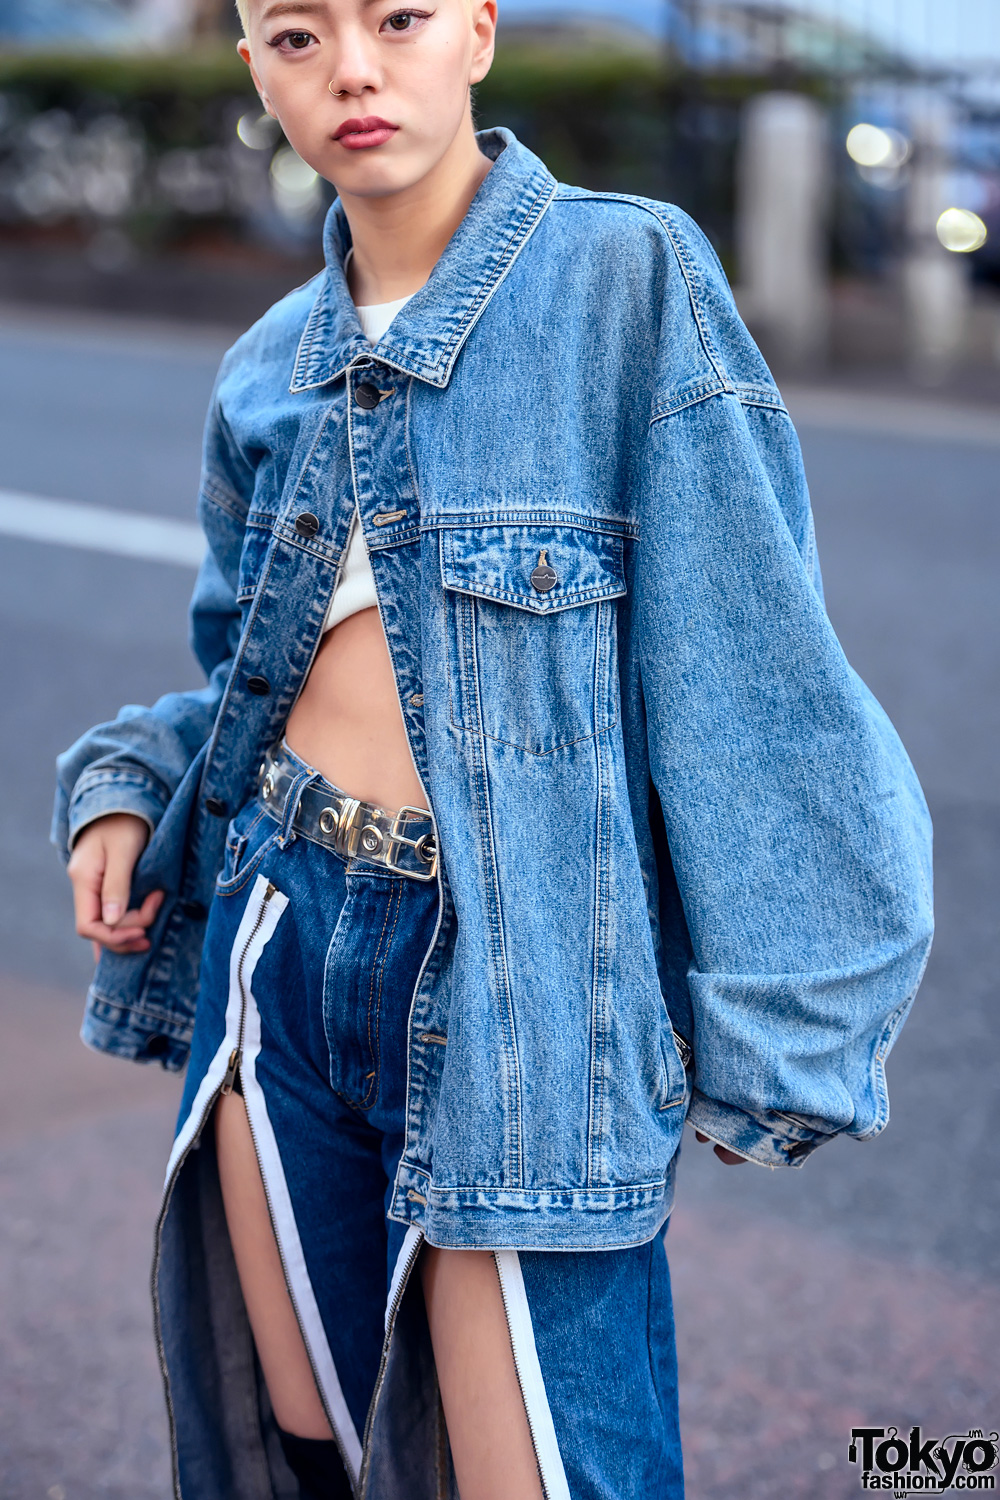 Shaved Head Harajuku Girl in Zip Front Jeans, Denim Jacket & Over-The ...